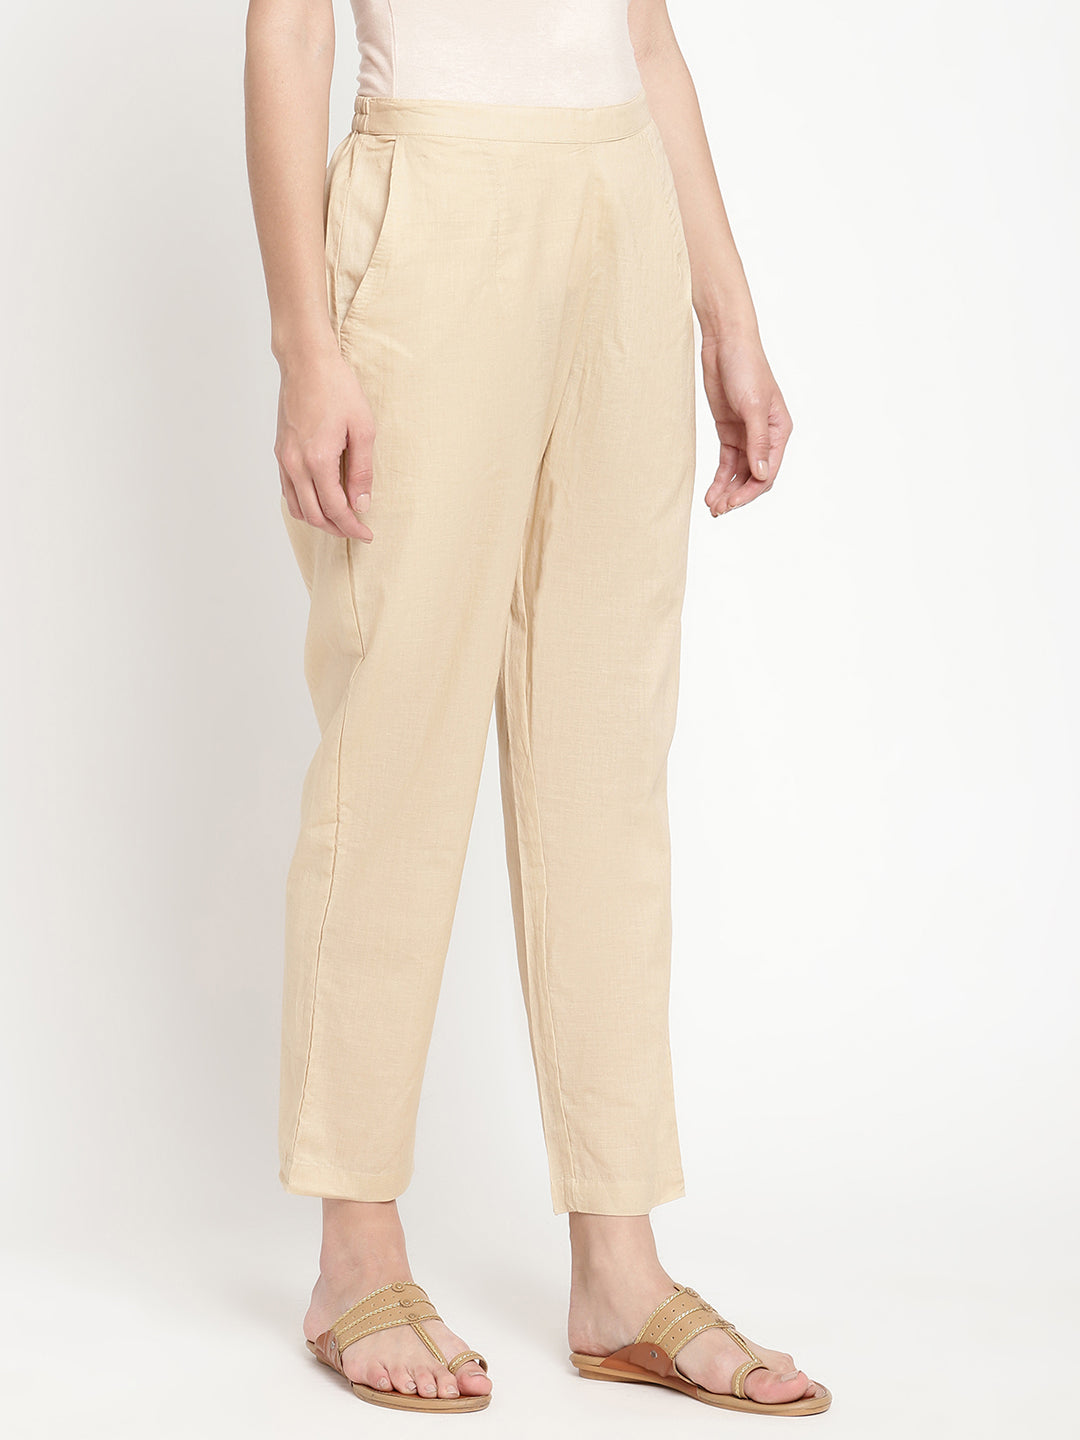 Beige cotton straight pant crafted by a homegrown brand named Savi. 